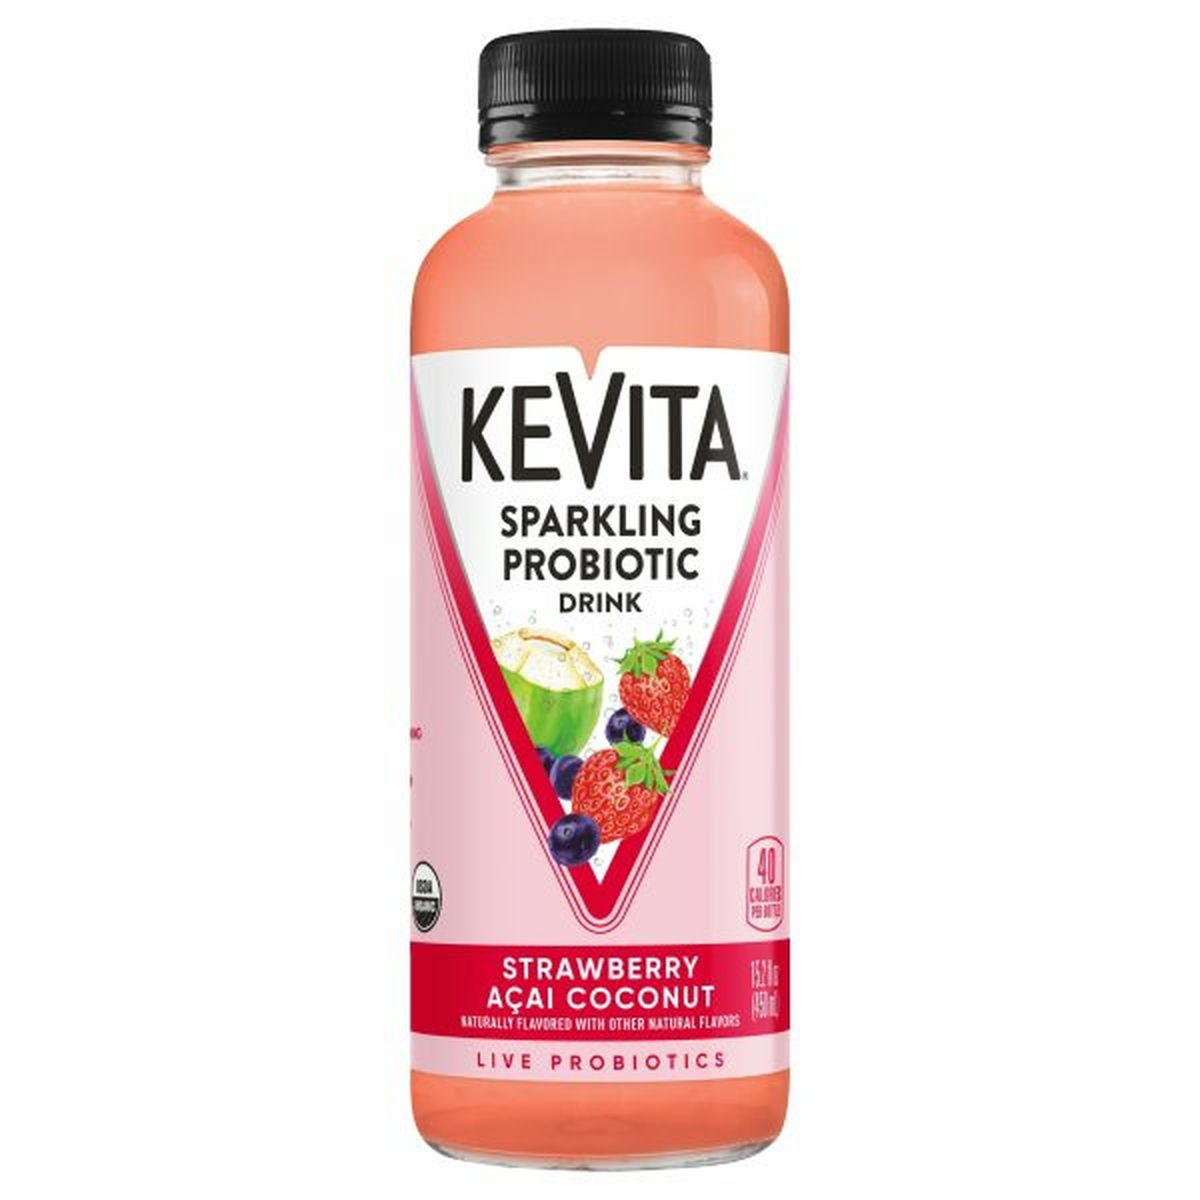 Calories in KeVita Sparkling Probiotic Drink Flavored Beverages Chilled, Strawberry Acai Coconut